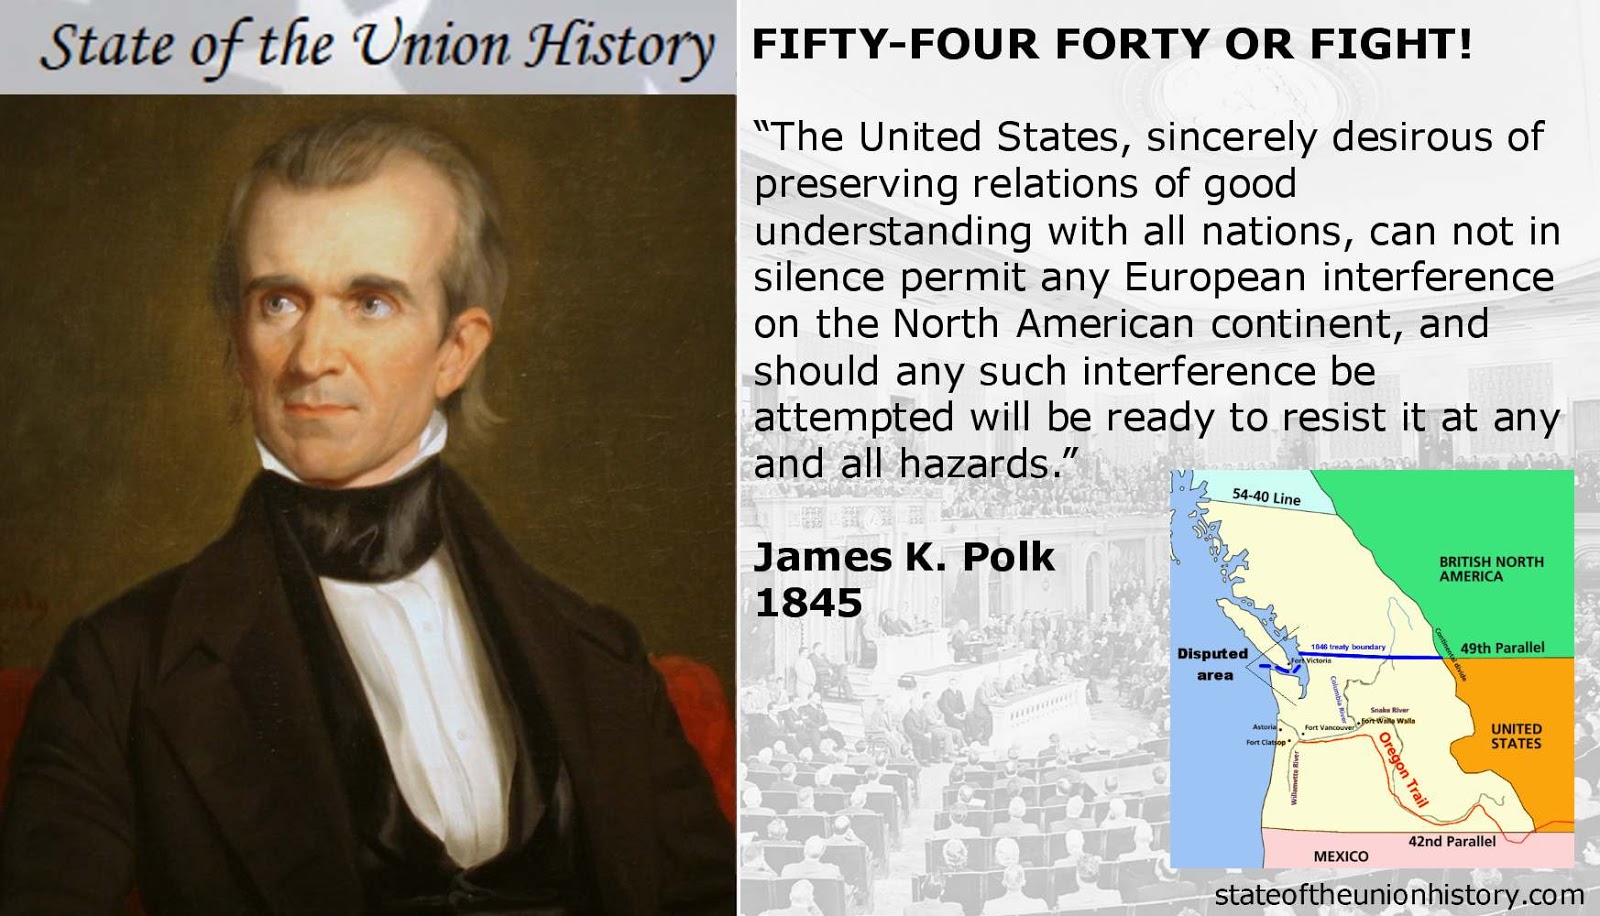 1845 James K Polk Fifty Four Forty Or Fight State Of The Union History